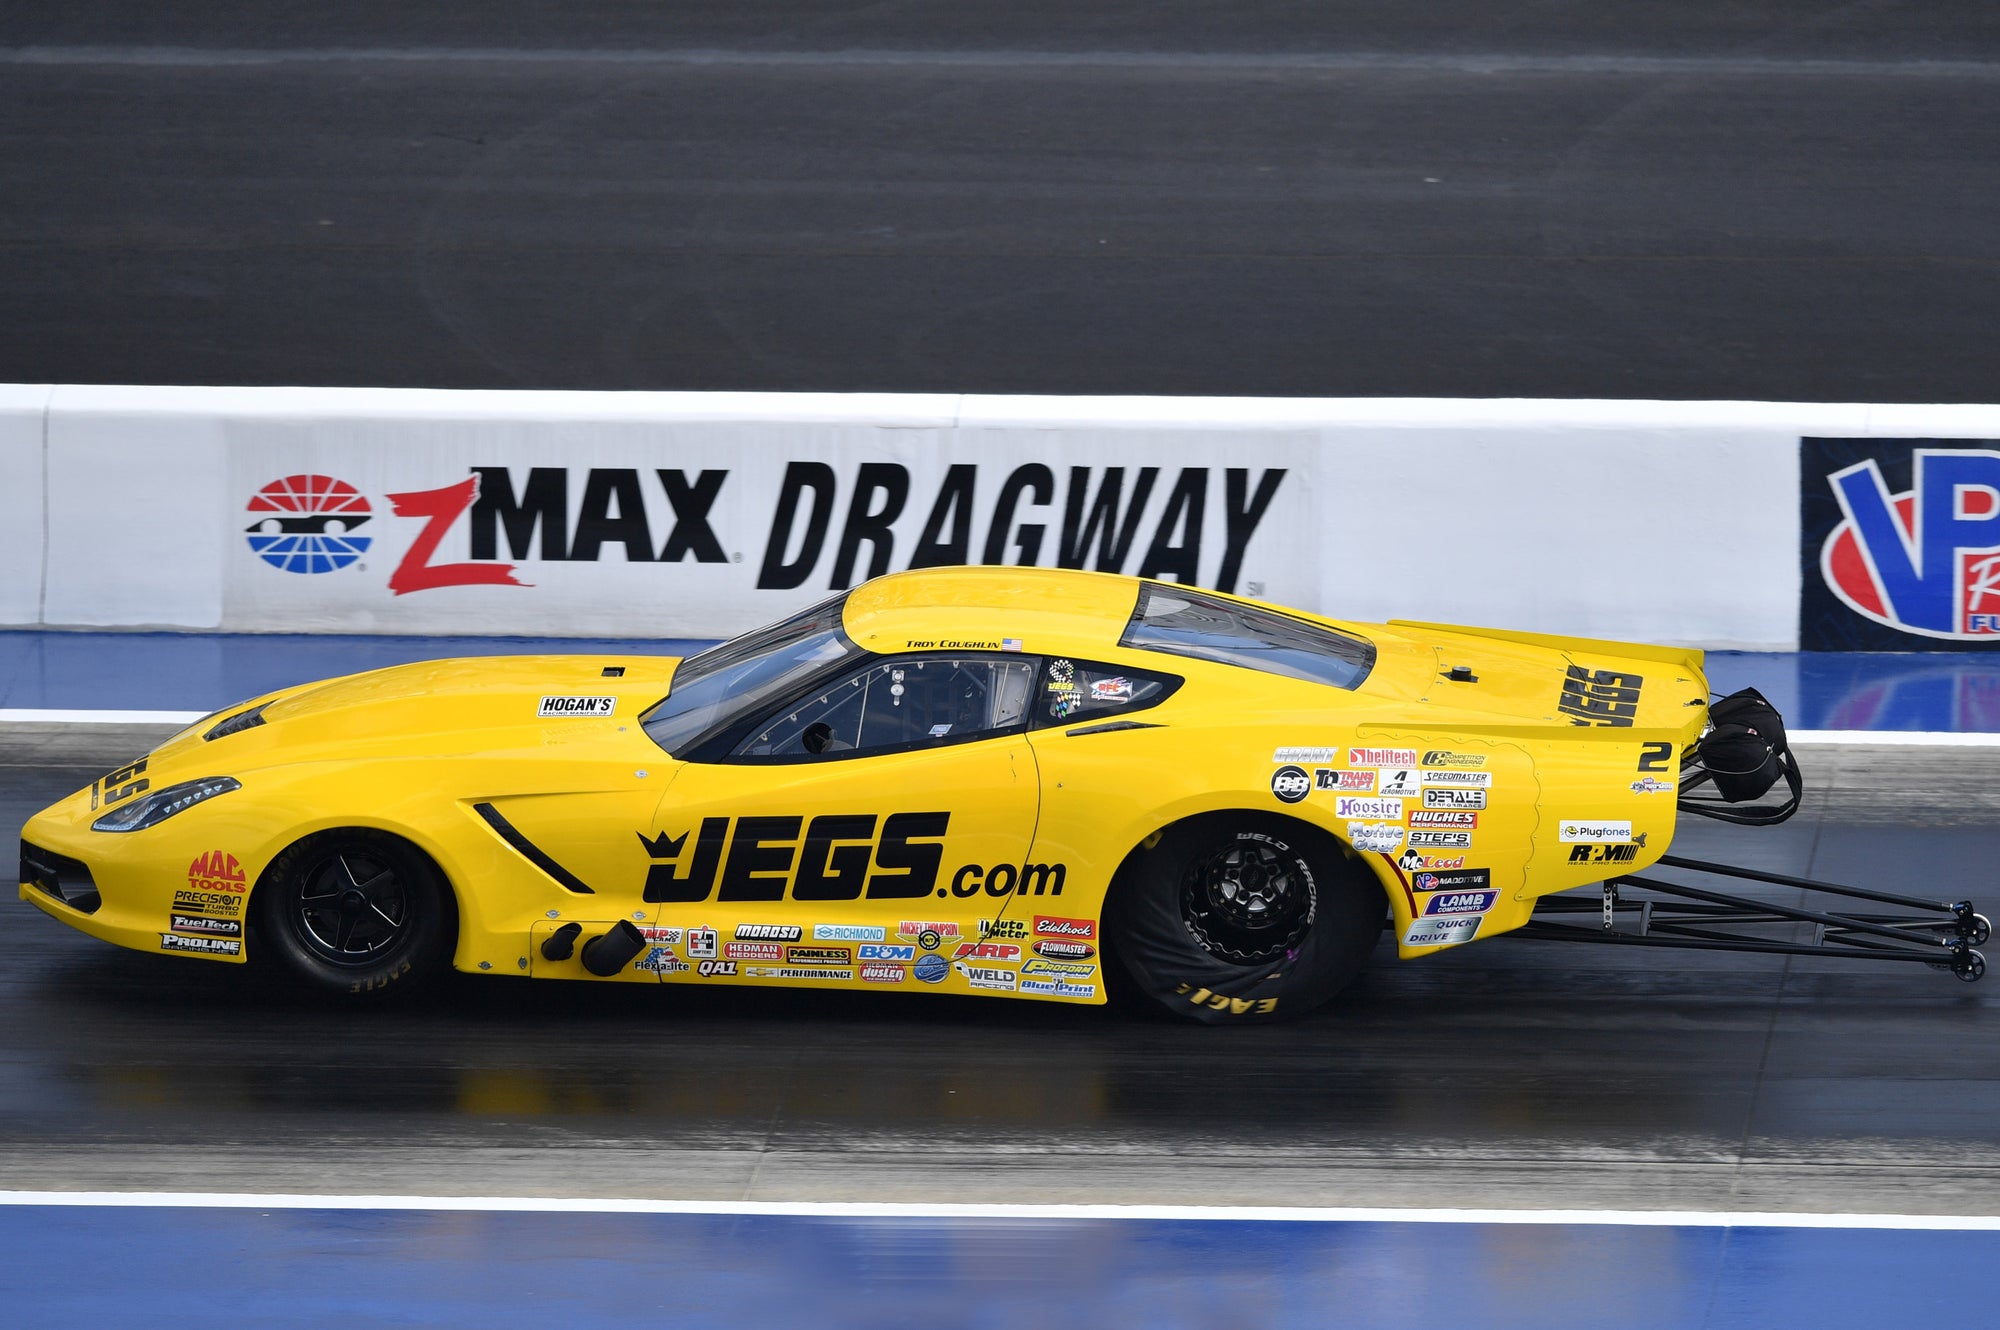 PRO LINE POWER GETS RUNNER-UP AT NHRA FOUR-WIDE AND RADIAL FEST